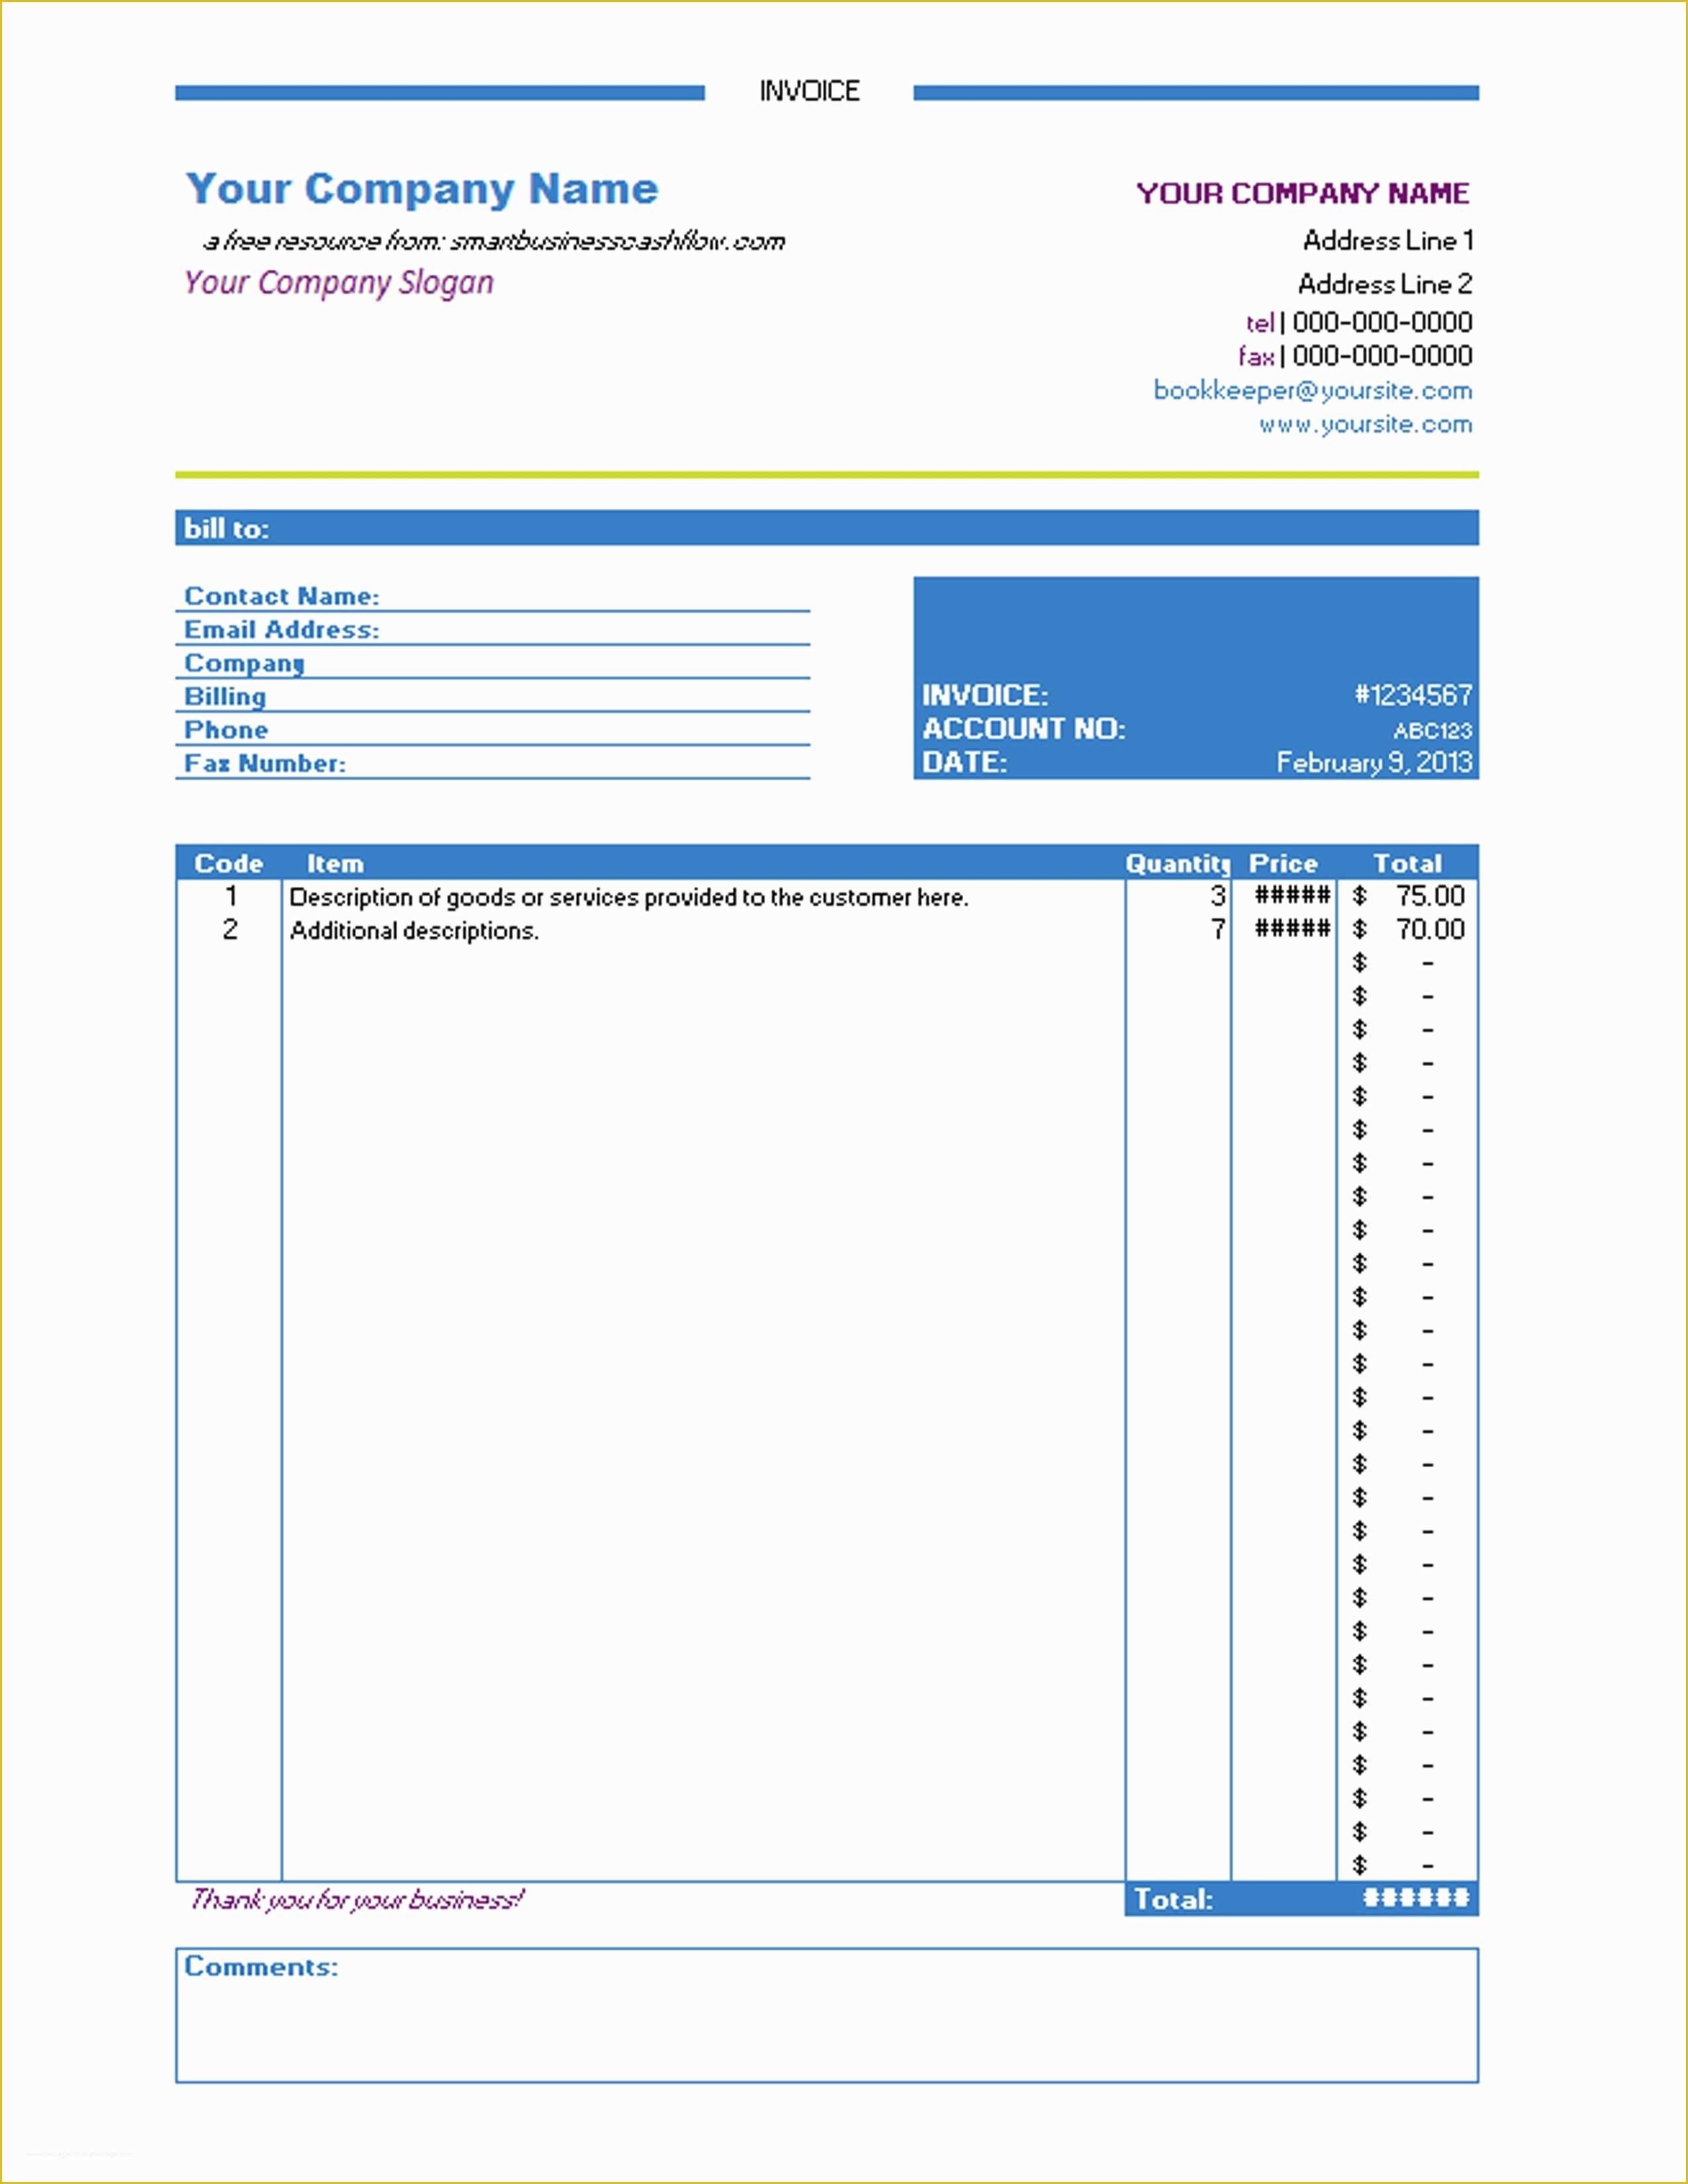 Invoice Template Excel Download Free Of Invoice Template Free Download Excel Invoice Template Ideas